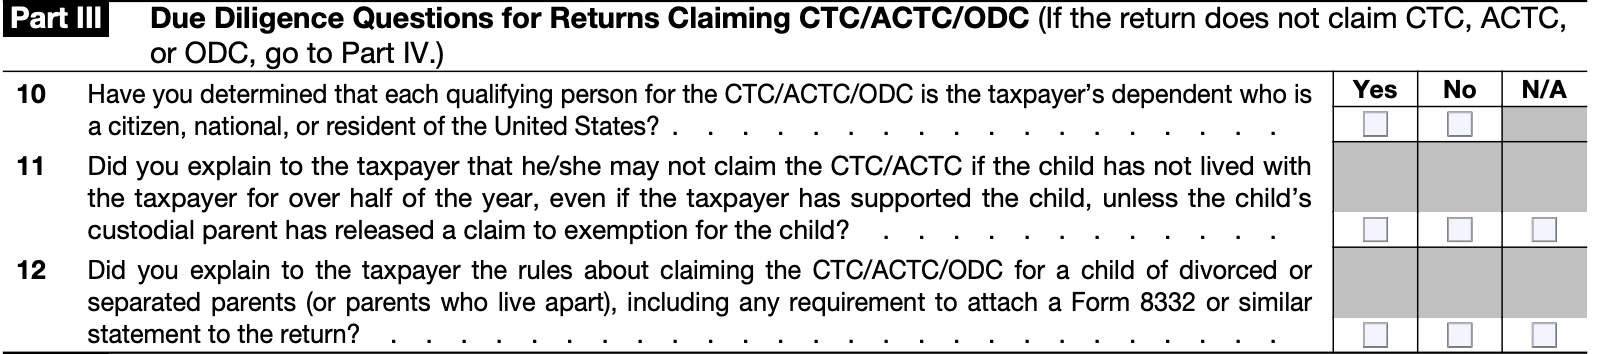 part iii: due diligence questions for returns claiming ctc/actc/odc